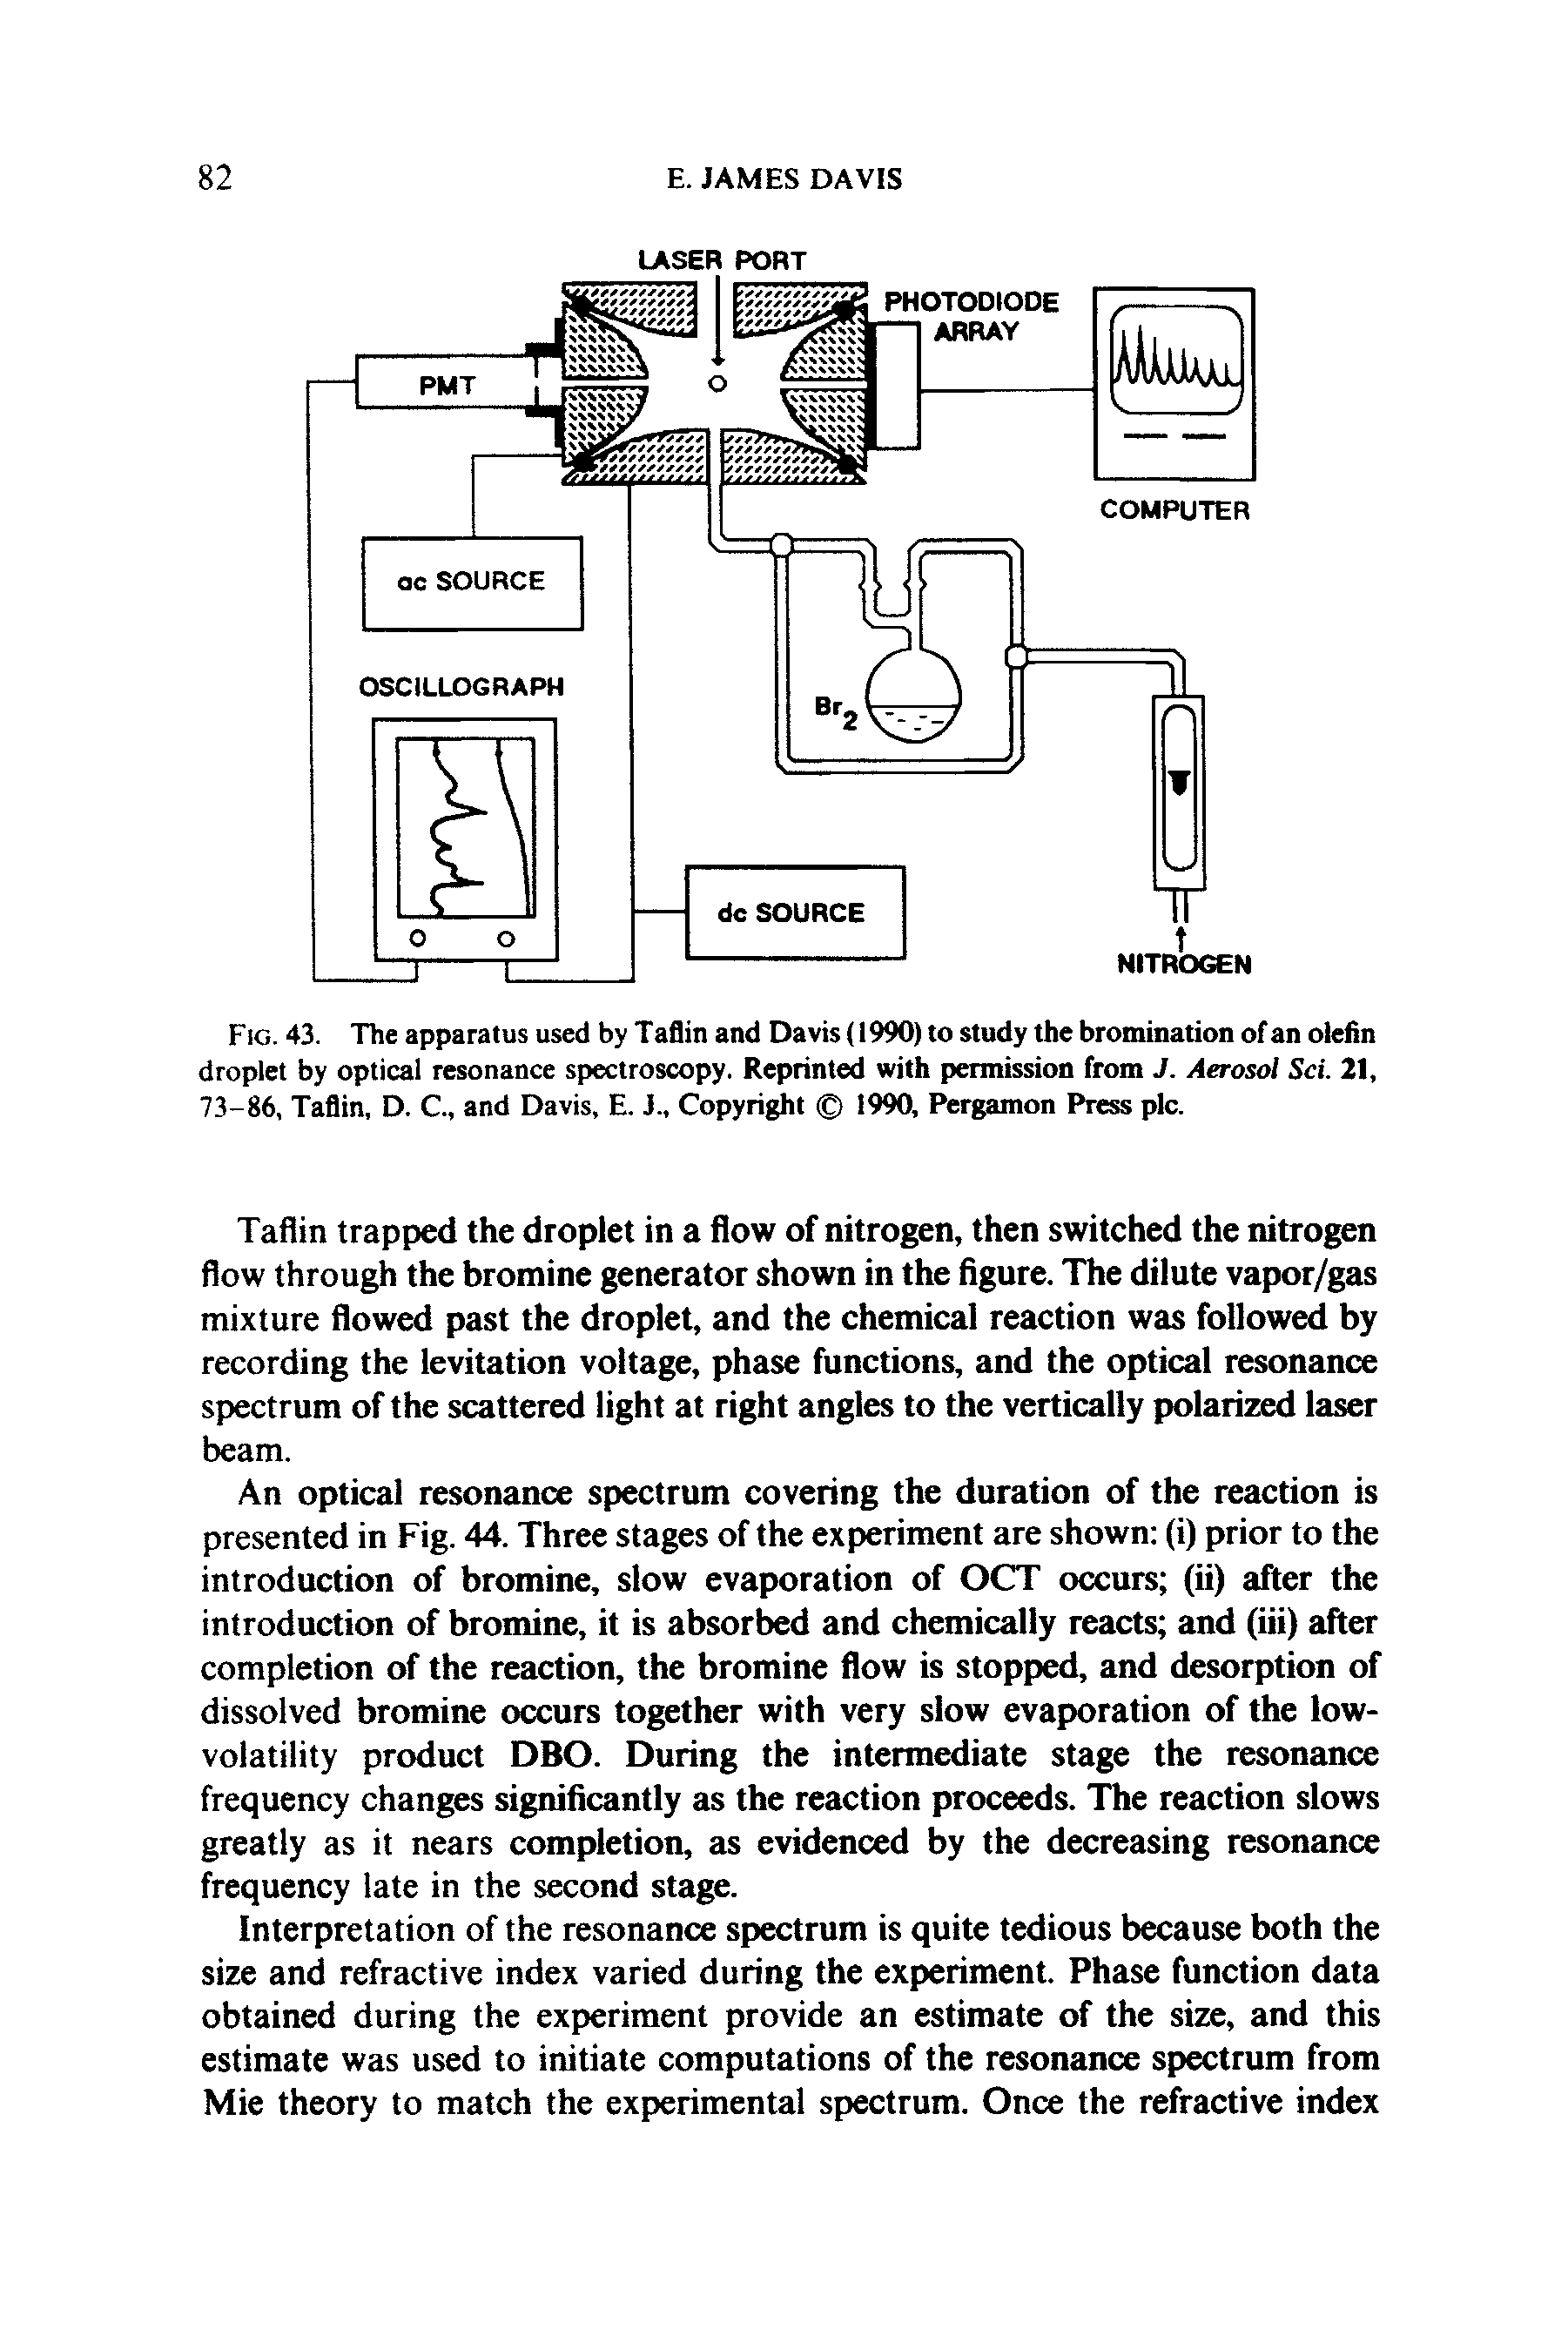 Fig. 43. The apparatus used by T aflin and Davis (1990) to study the bromination of an olefin droplet by optical resonance spectroscopy. Reprinted with permission from J. Aerosol Sci. 21, 73-86, Taflin, D. C., and Davis, E. J., Copyright 1990, Pergamon Press pic.